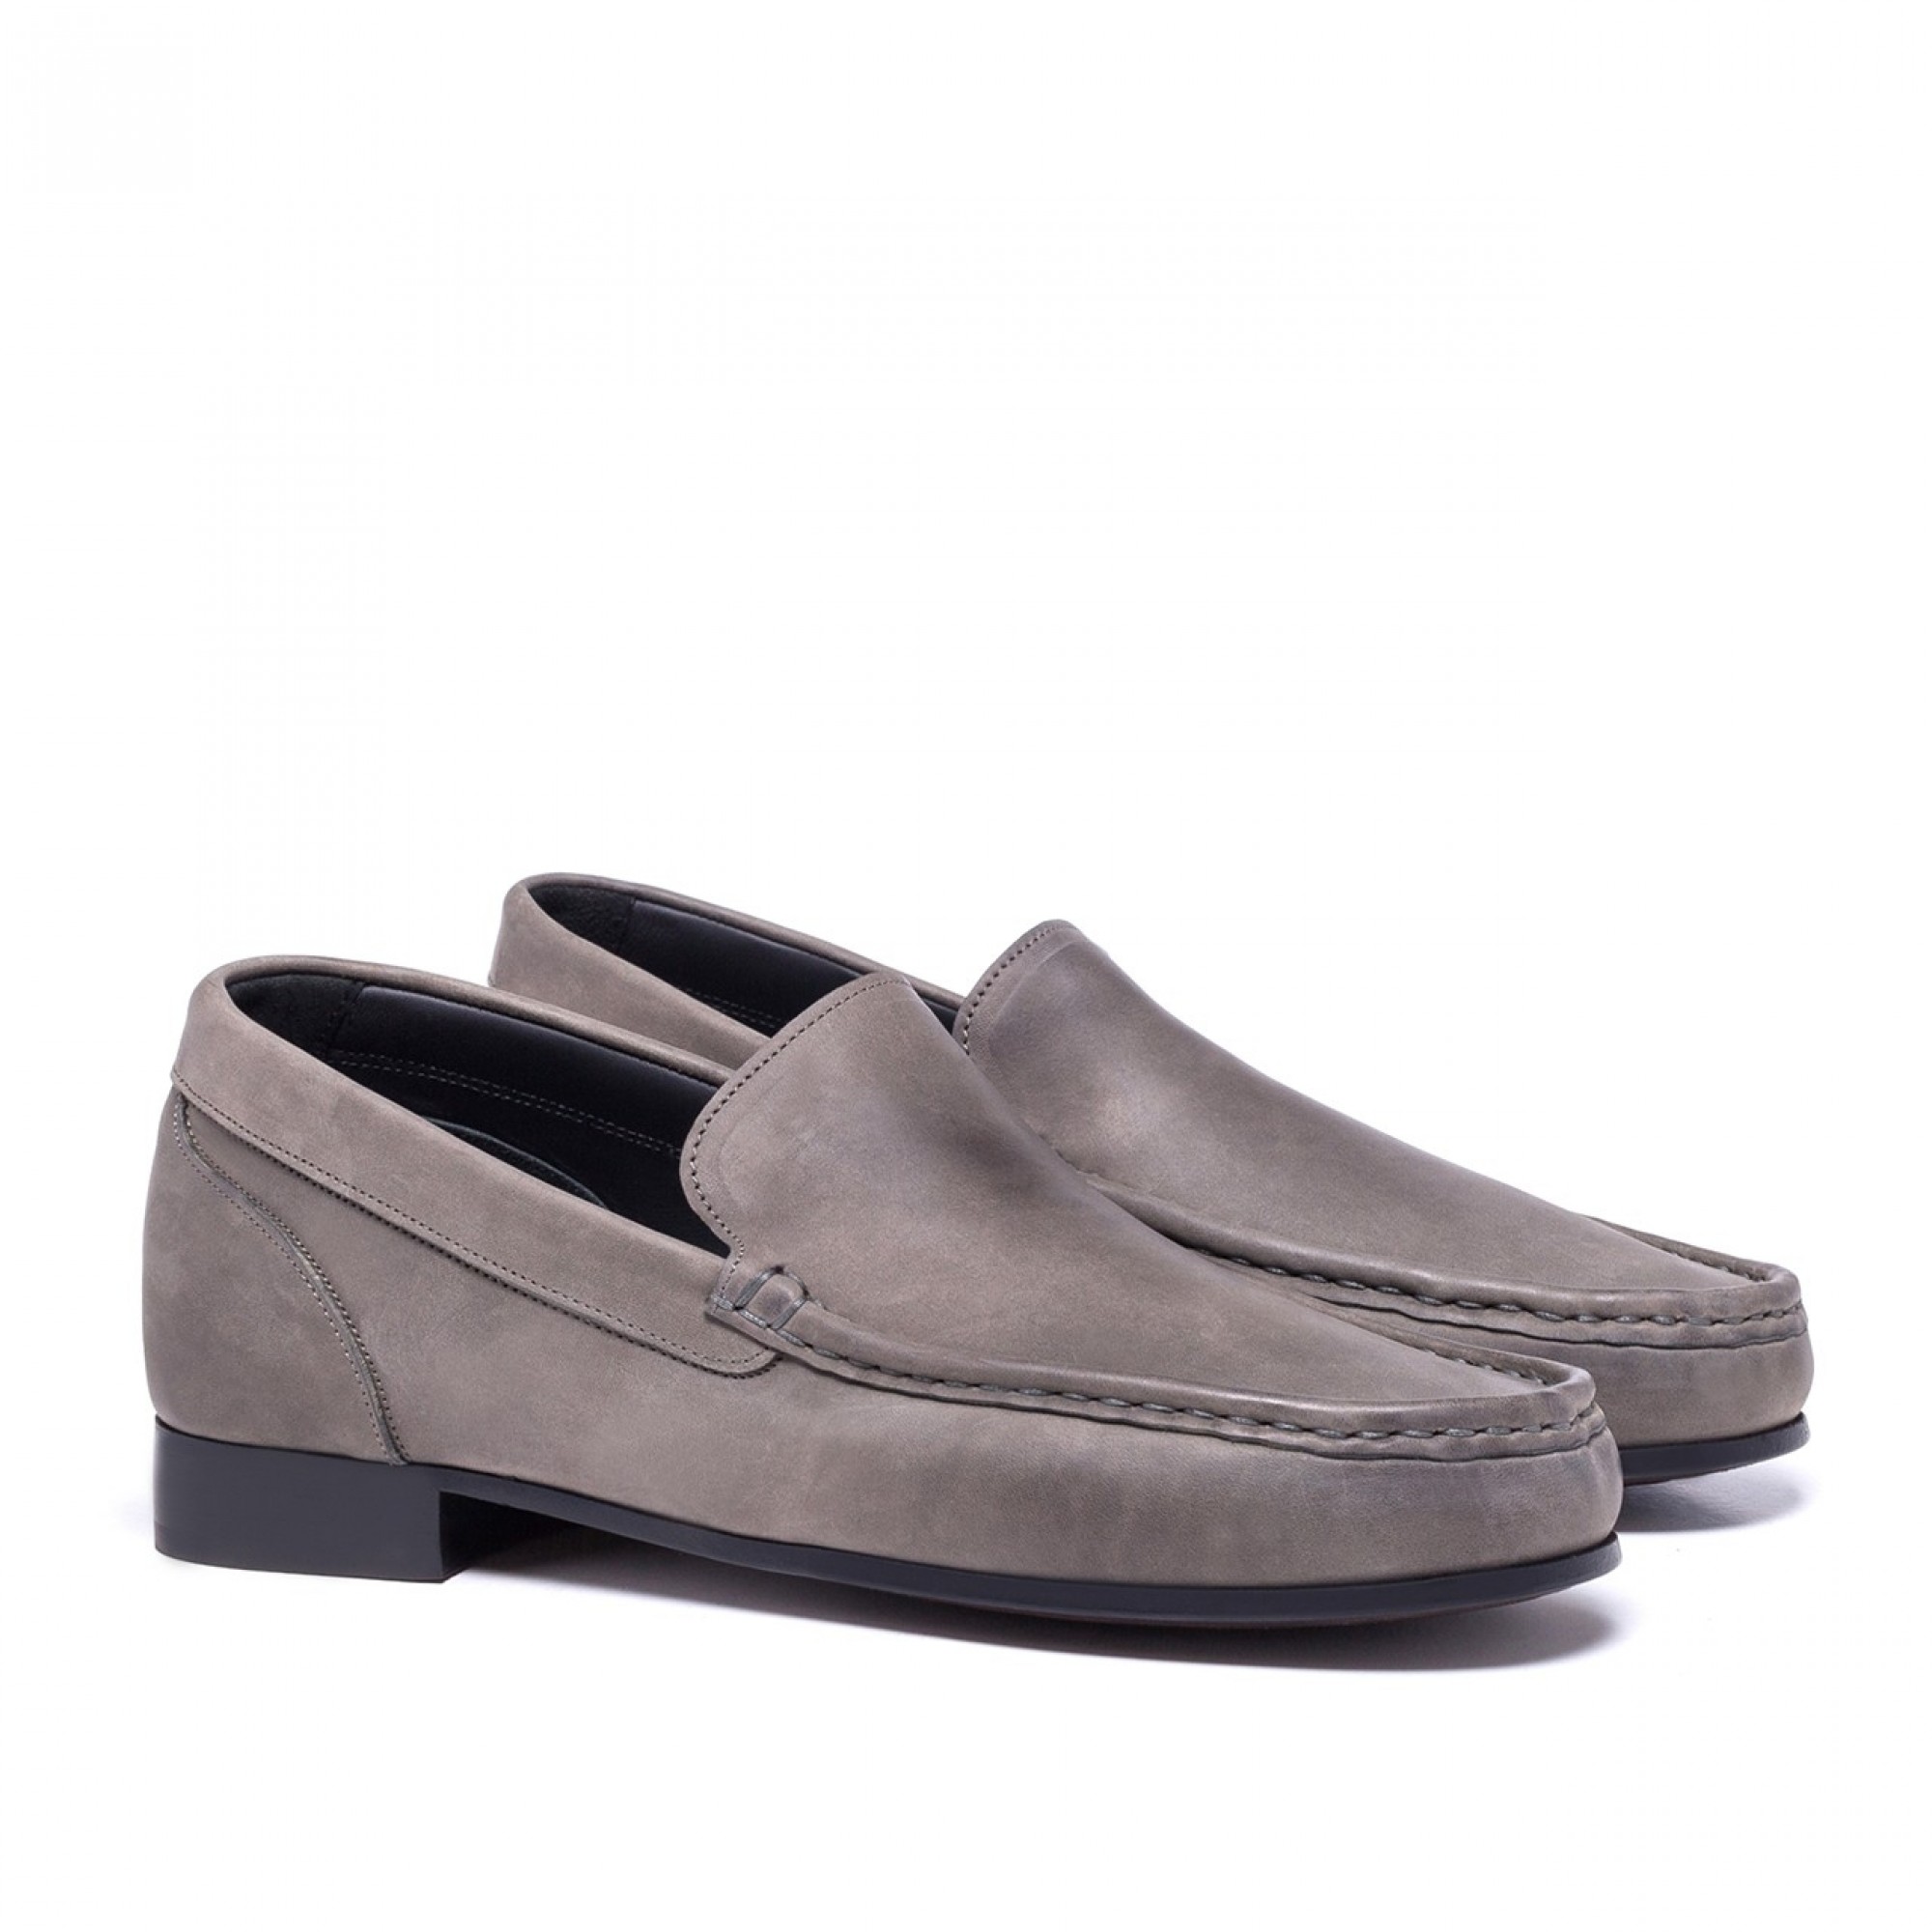 Casablanca - Elevator Loafers in Leather plus up to 2.6 inches